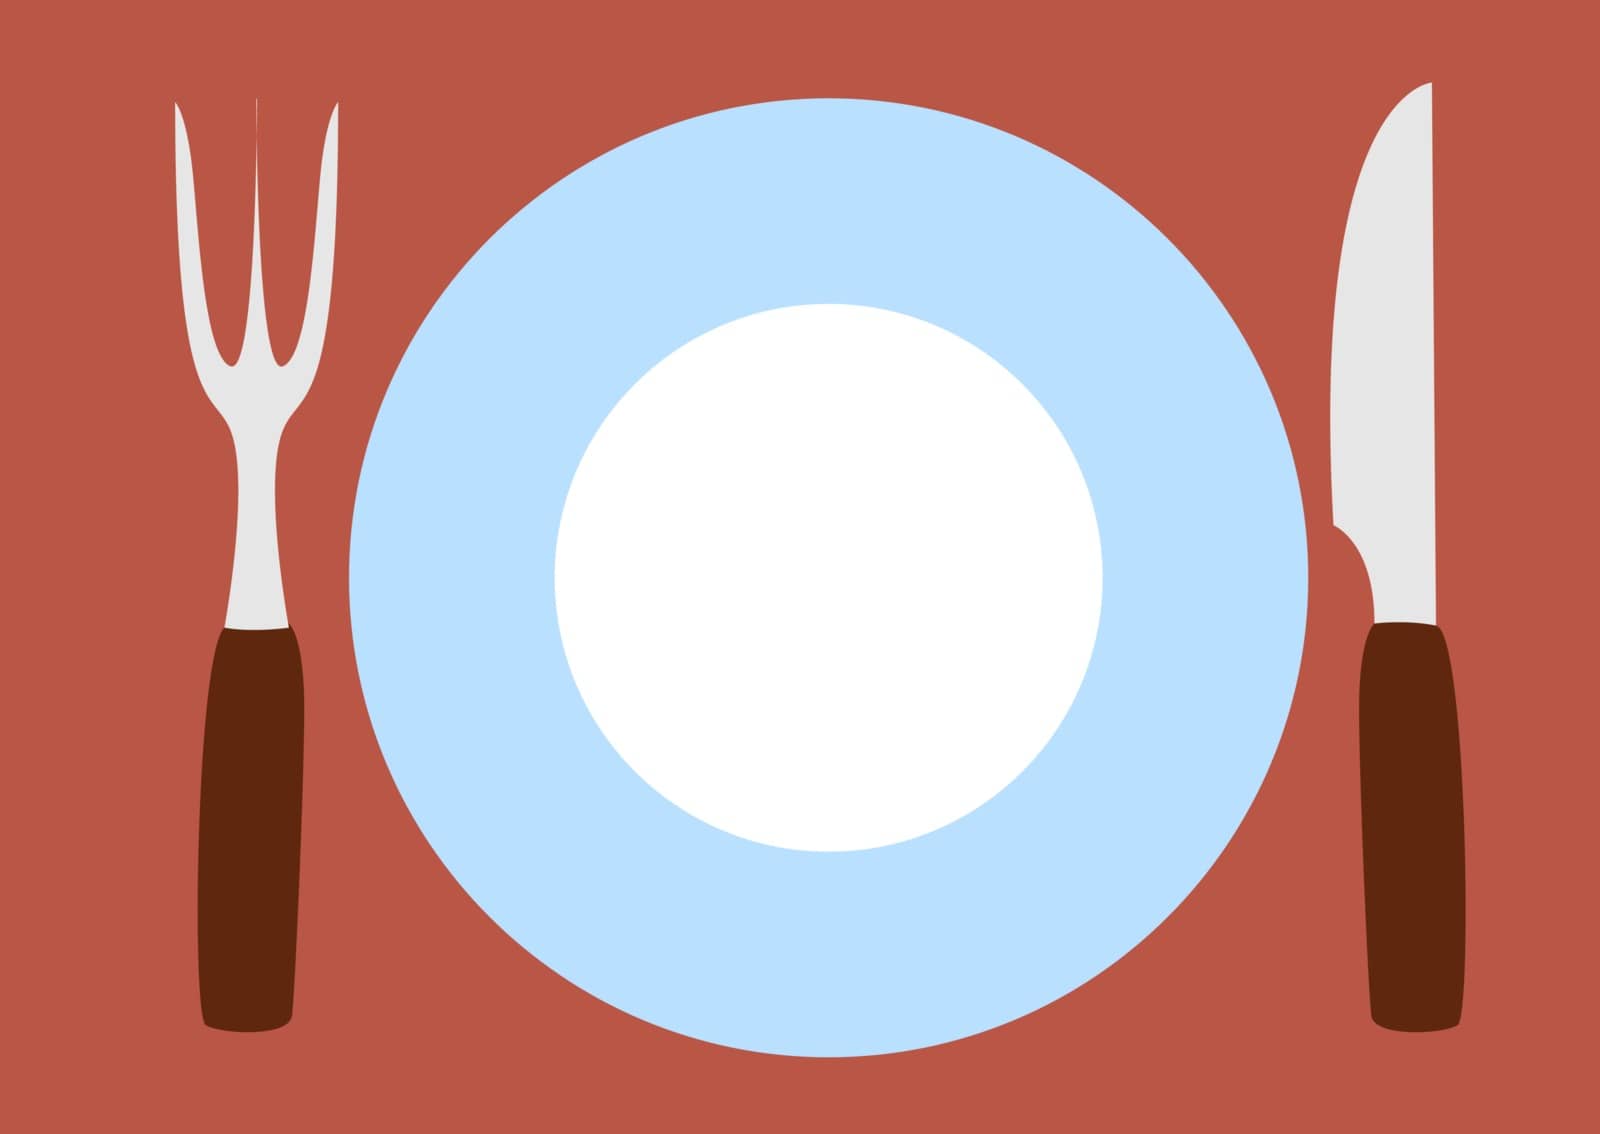 Plate with fork and knife, illustration, vector on white background.